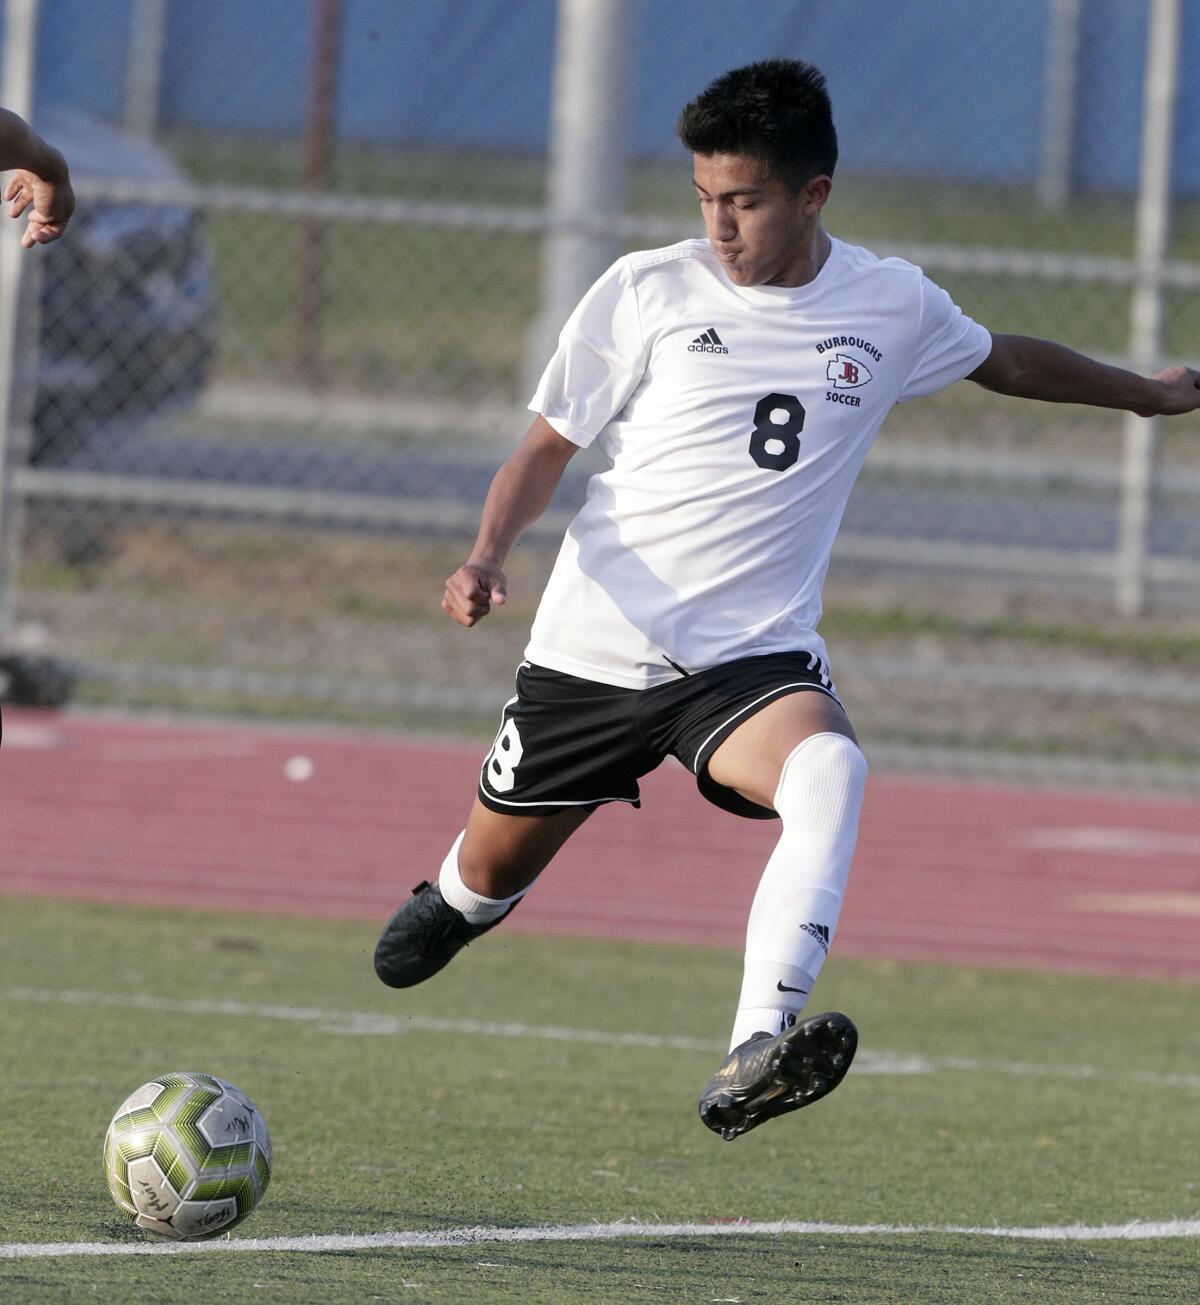 Burroughs' Elias Galaviz strides into a shot against Muir in a Pacific League boys' soccer game on Tuesday at Muir.